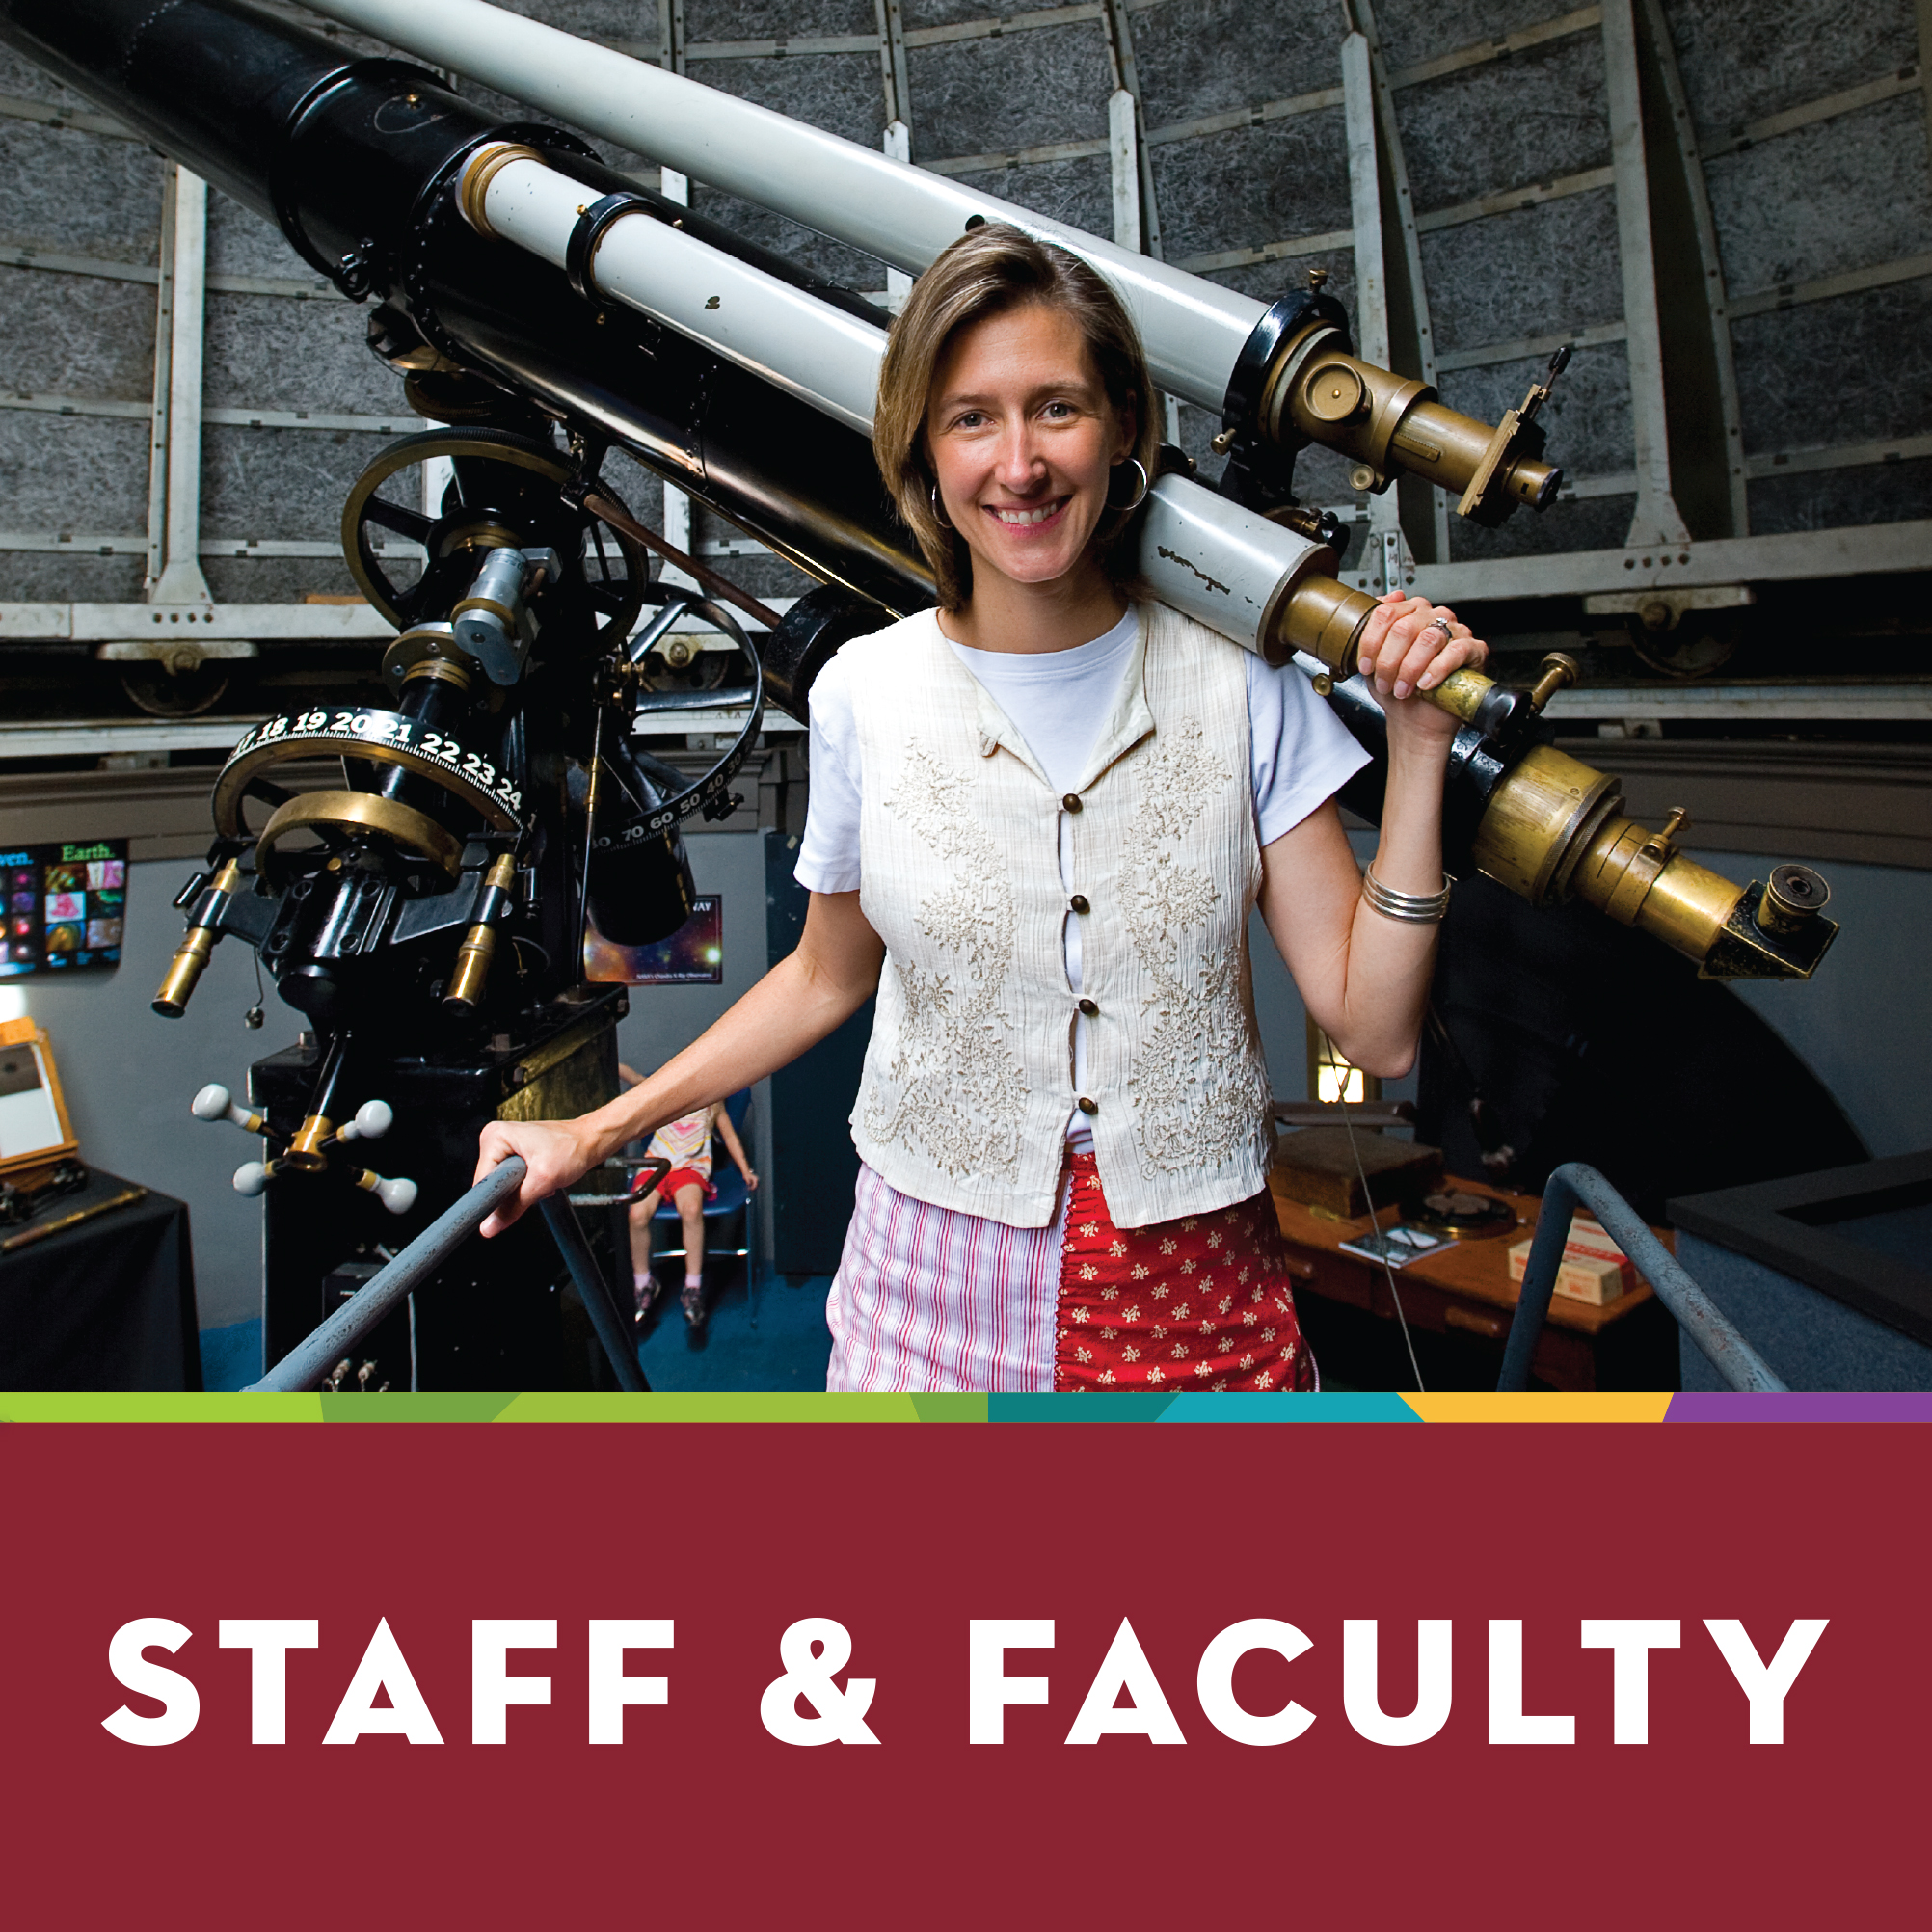 faculty/staff member in front of large telescope, text box says Staff and Faculty